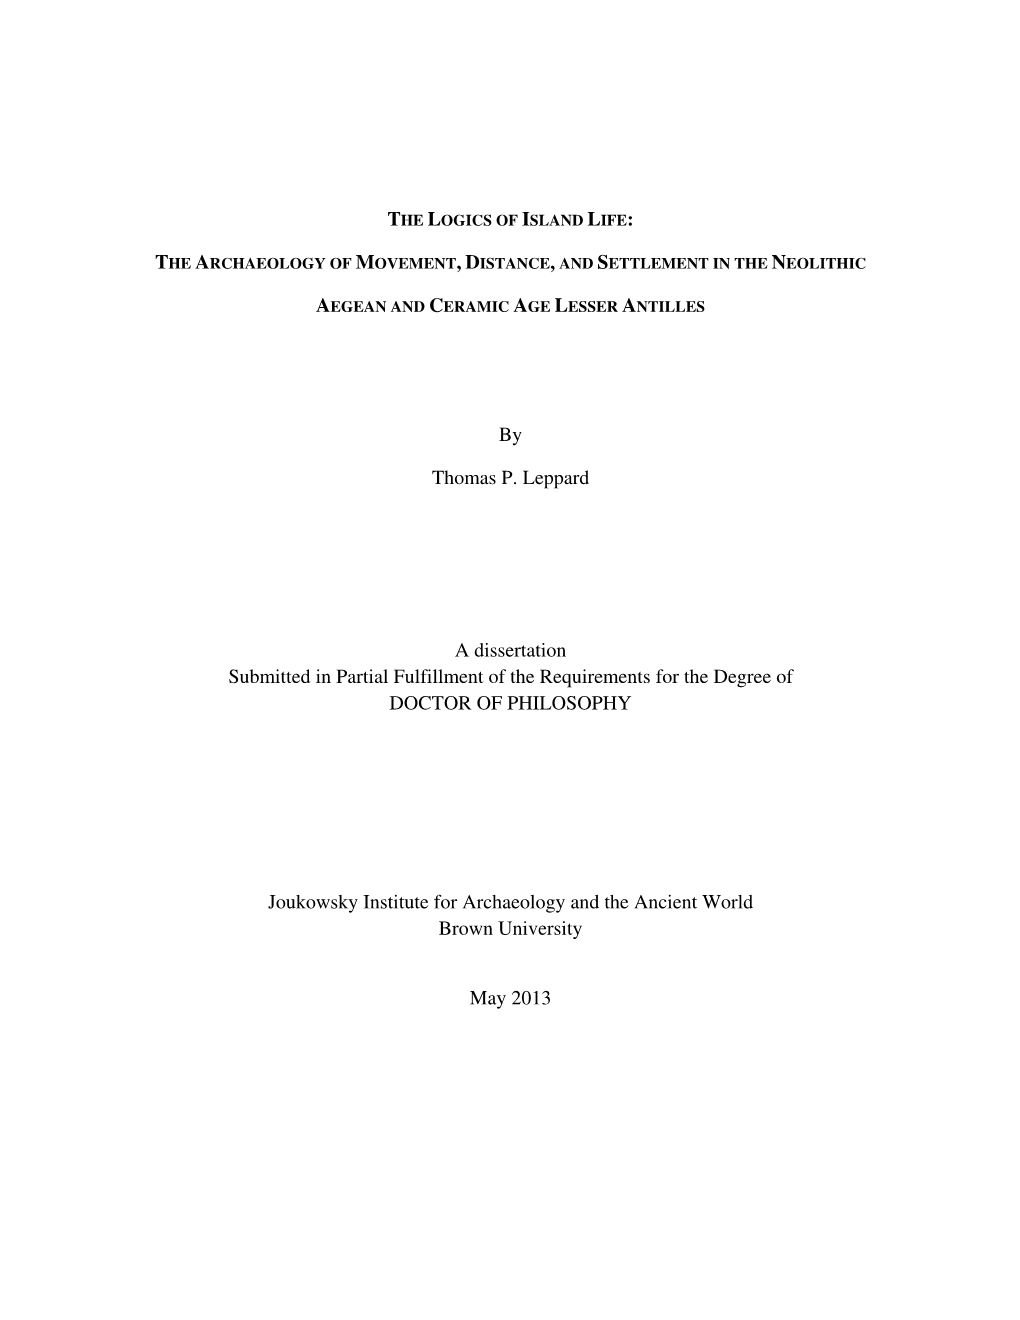 By Thomas P. Leppard a Dissertation Submitted in Partial Fulfillment of the Requirements for the Degree of DOCTOR of PHILOSOPHY